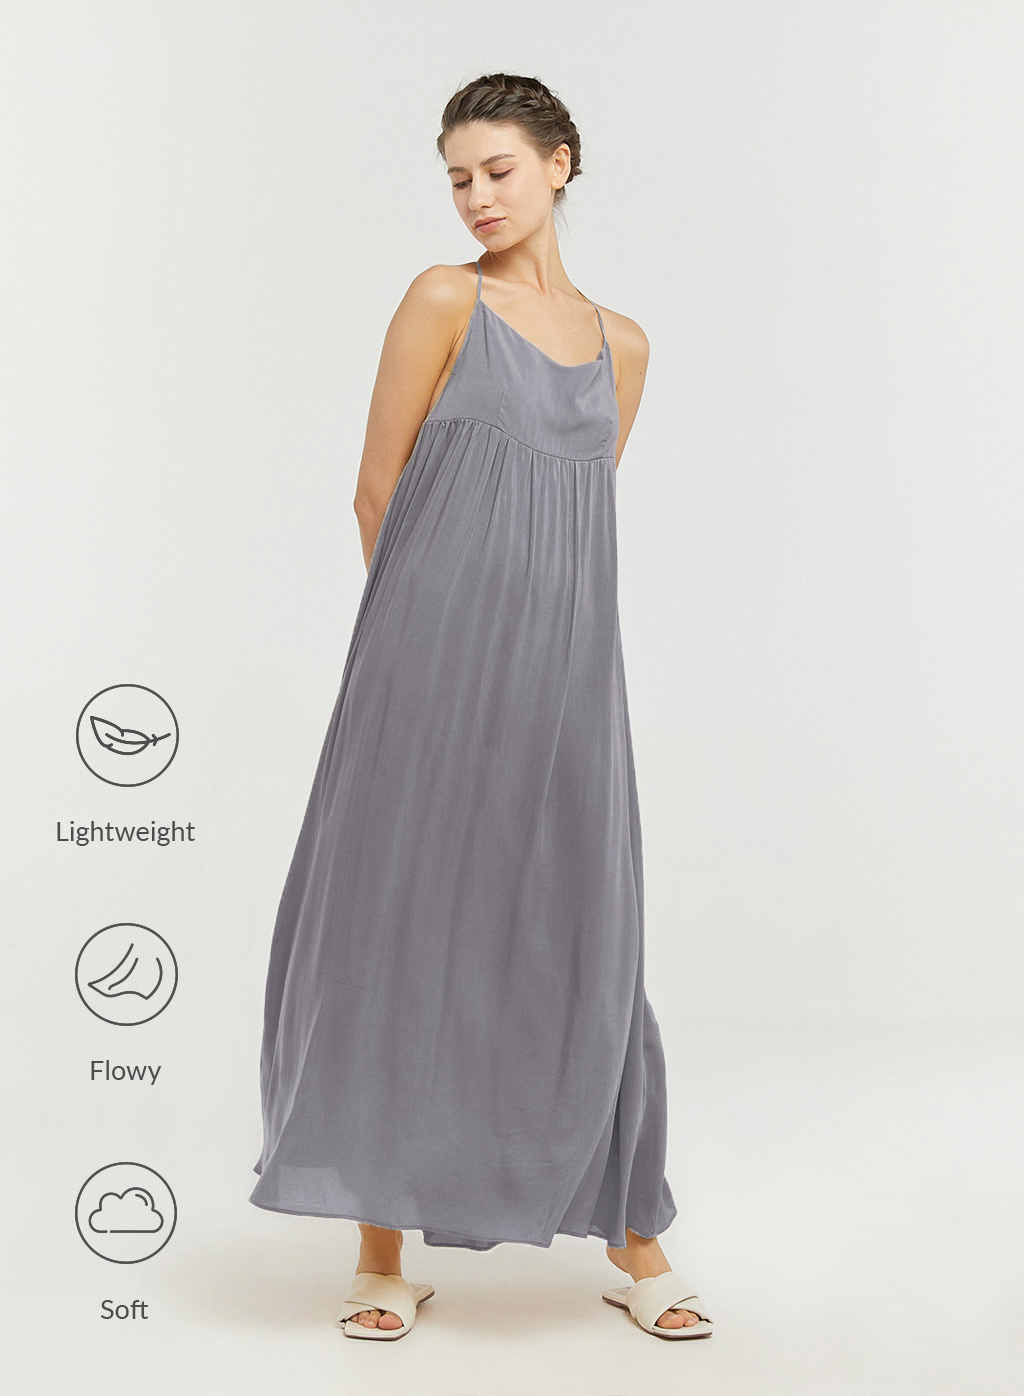 Nap Loungewear Backless Halter Dress In Middle Grey